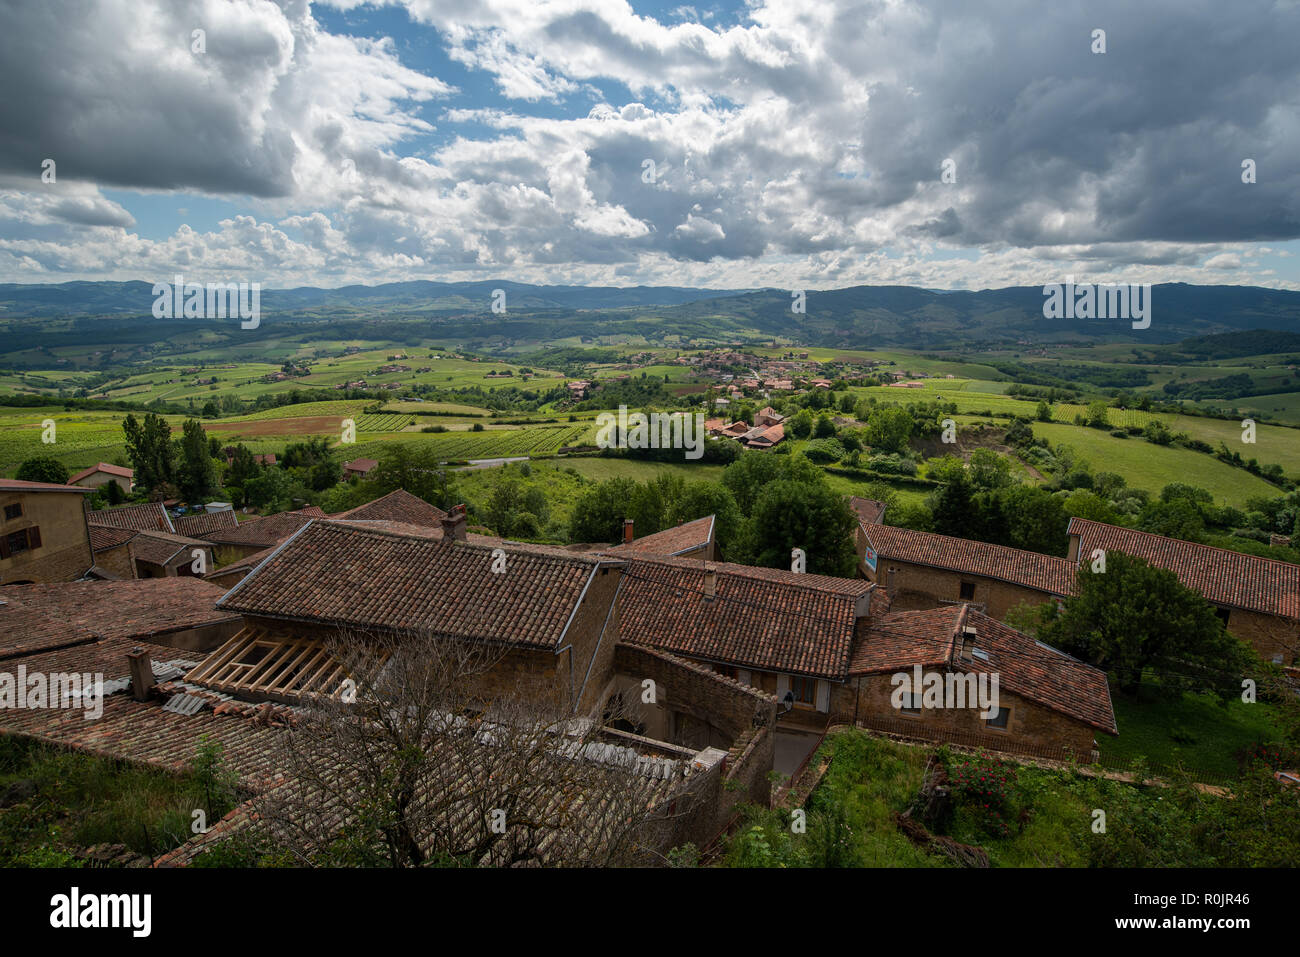 The Beaujolais wine growing landscape in France nestles under a dramatic cloudy sky, as viewed from the top of small picturesque village of Oingt. Stock Photo